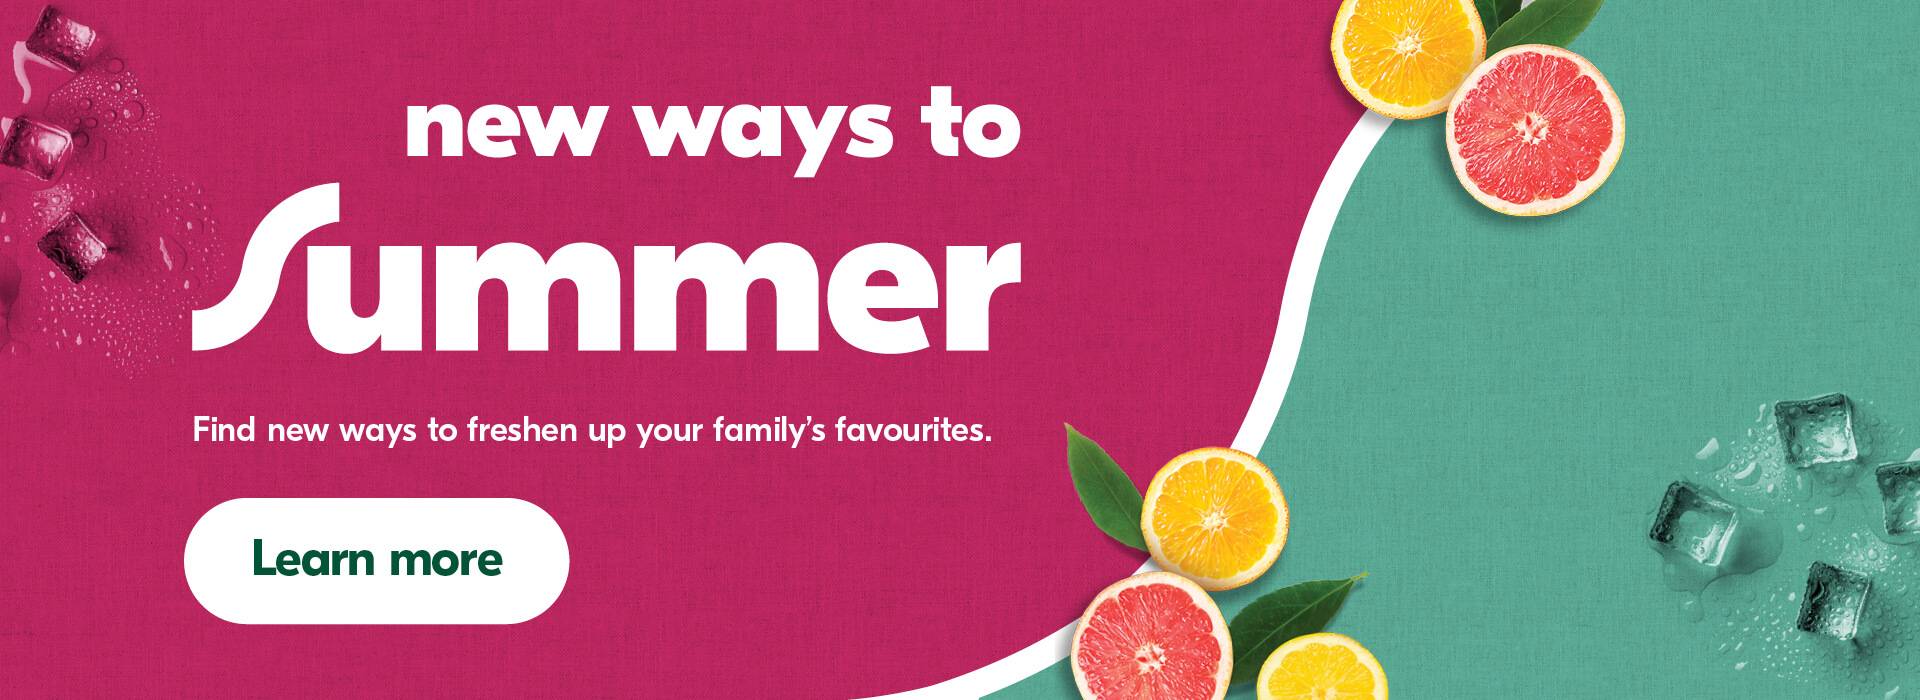 Text Reading 'New ways to summer. Find new ways to freshen up your family's favourites. 'Learn more' from the button given below.'